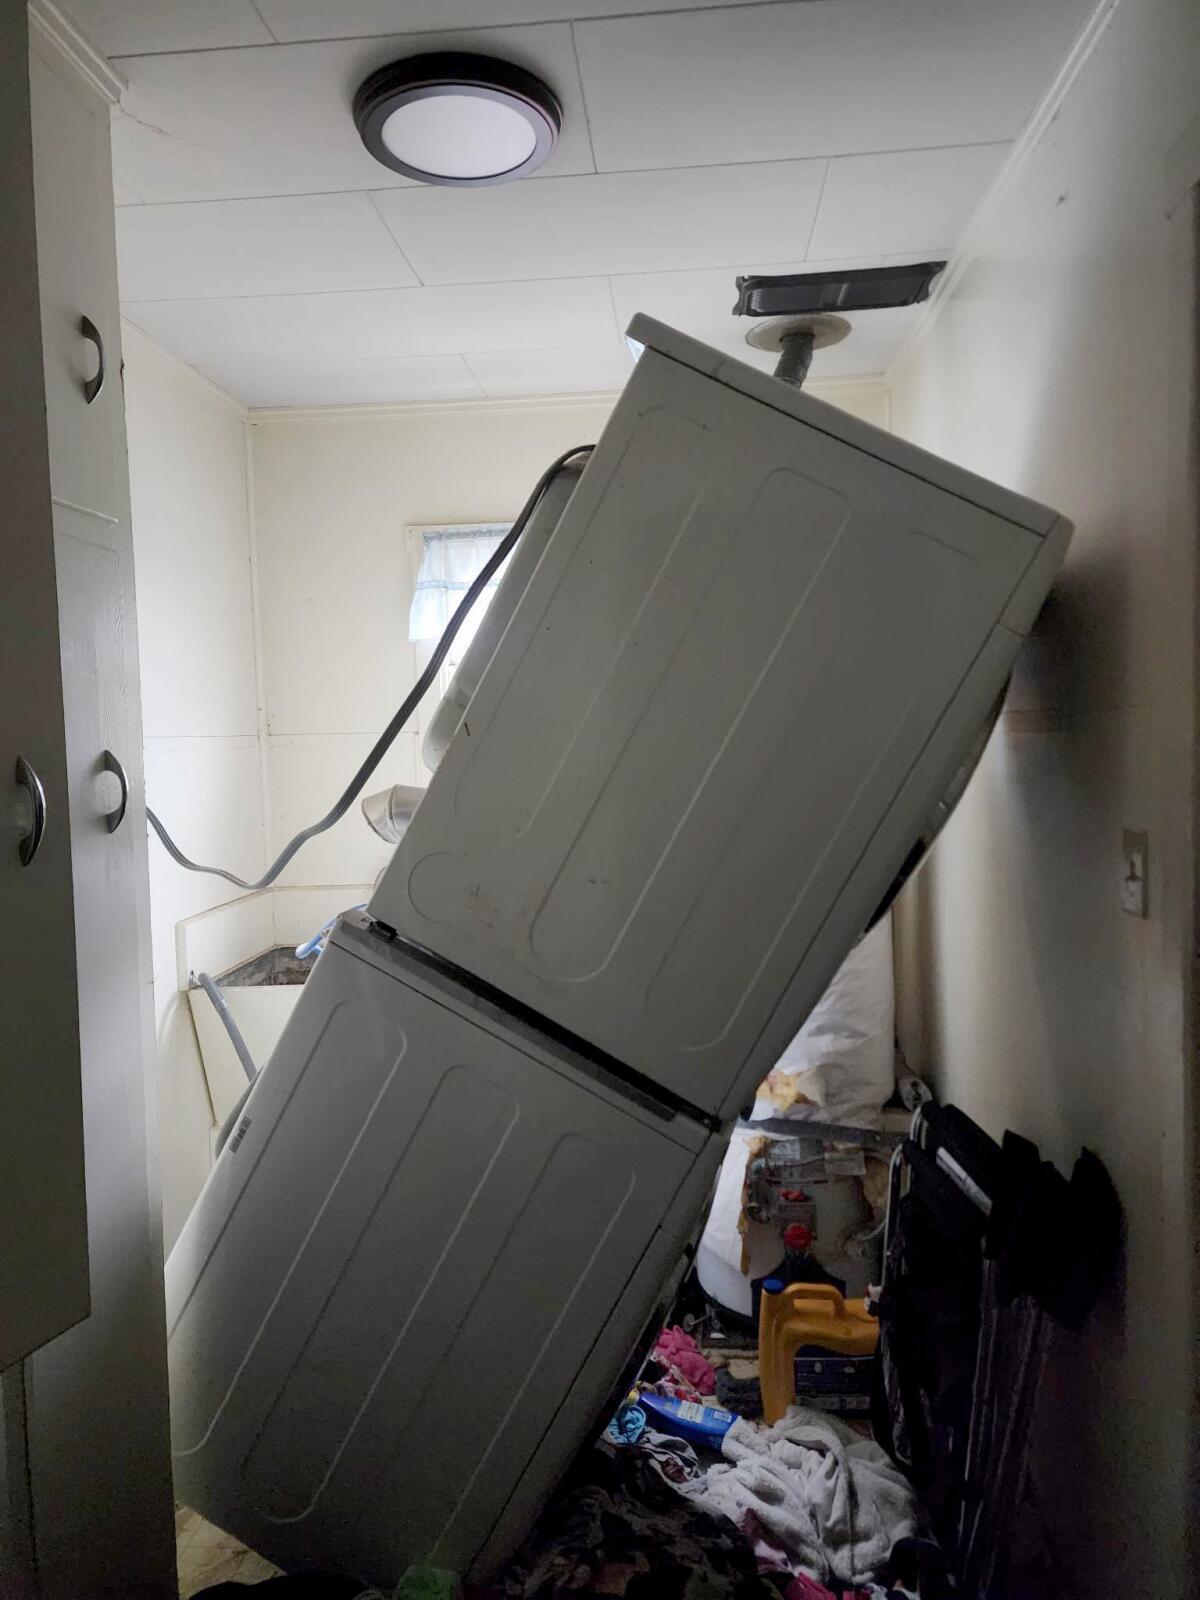 A stack of washing machine and a dryer is seen falling, leaning against a door with other items strewn about.